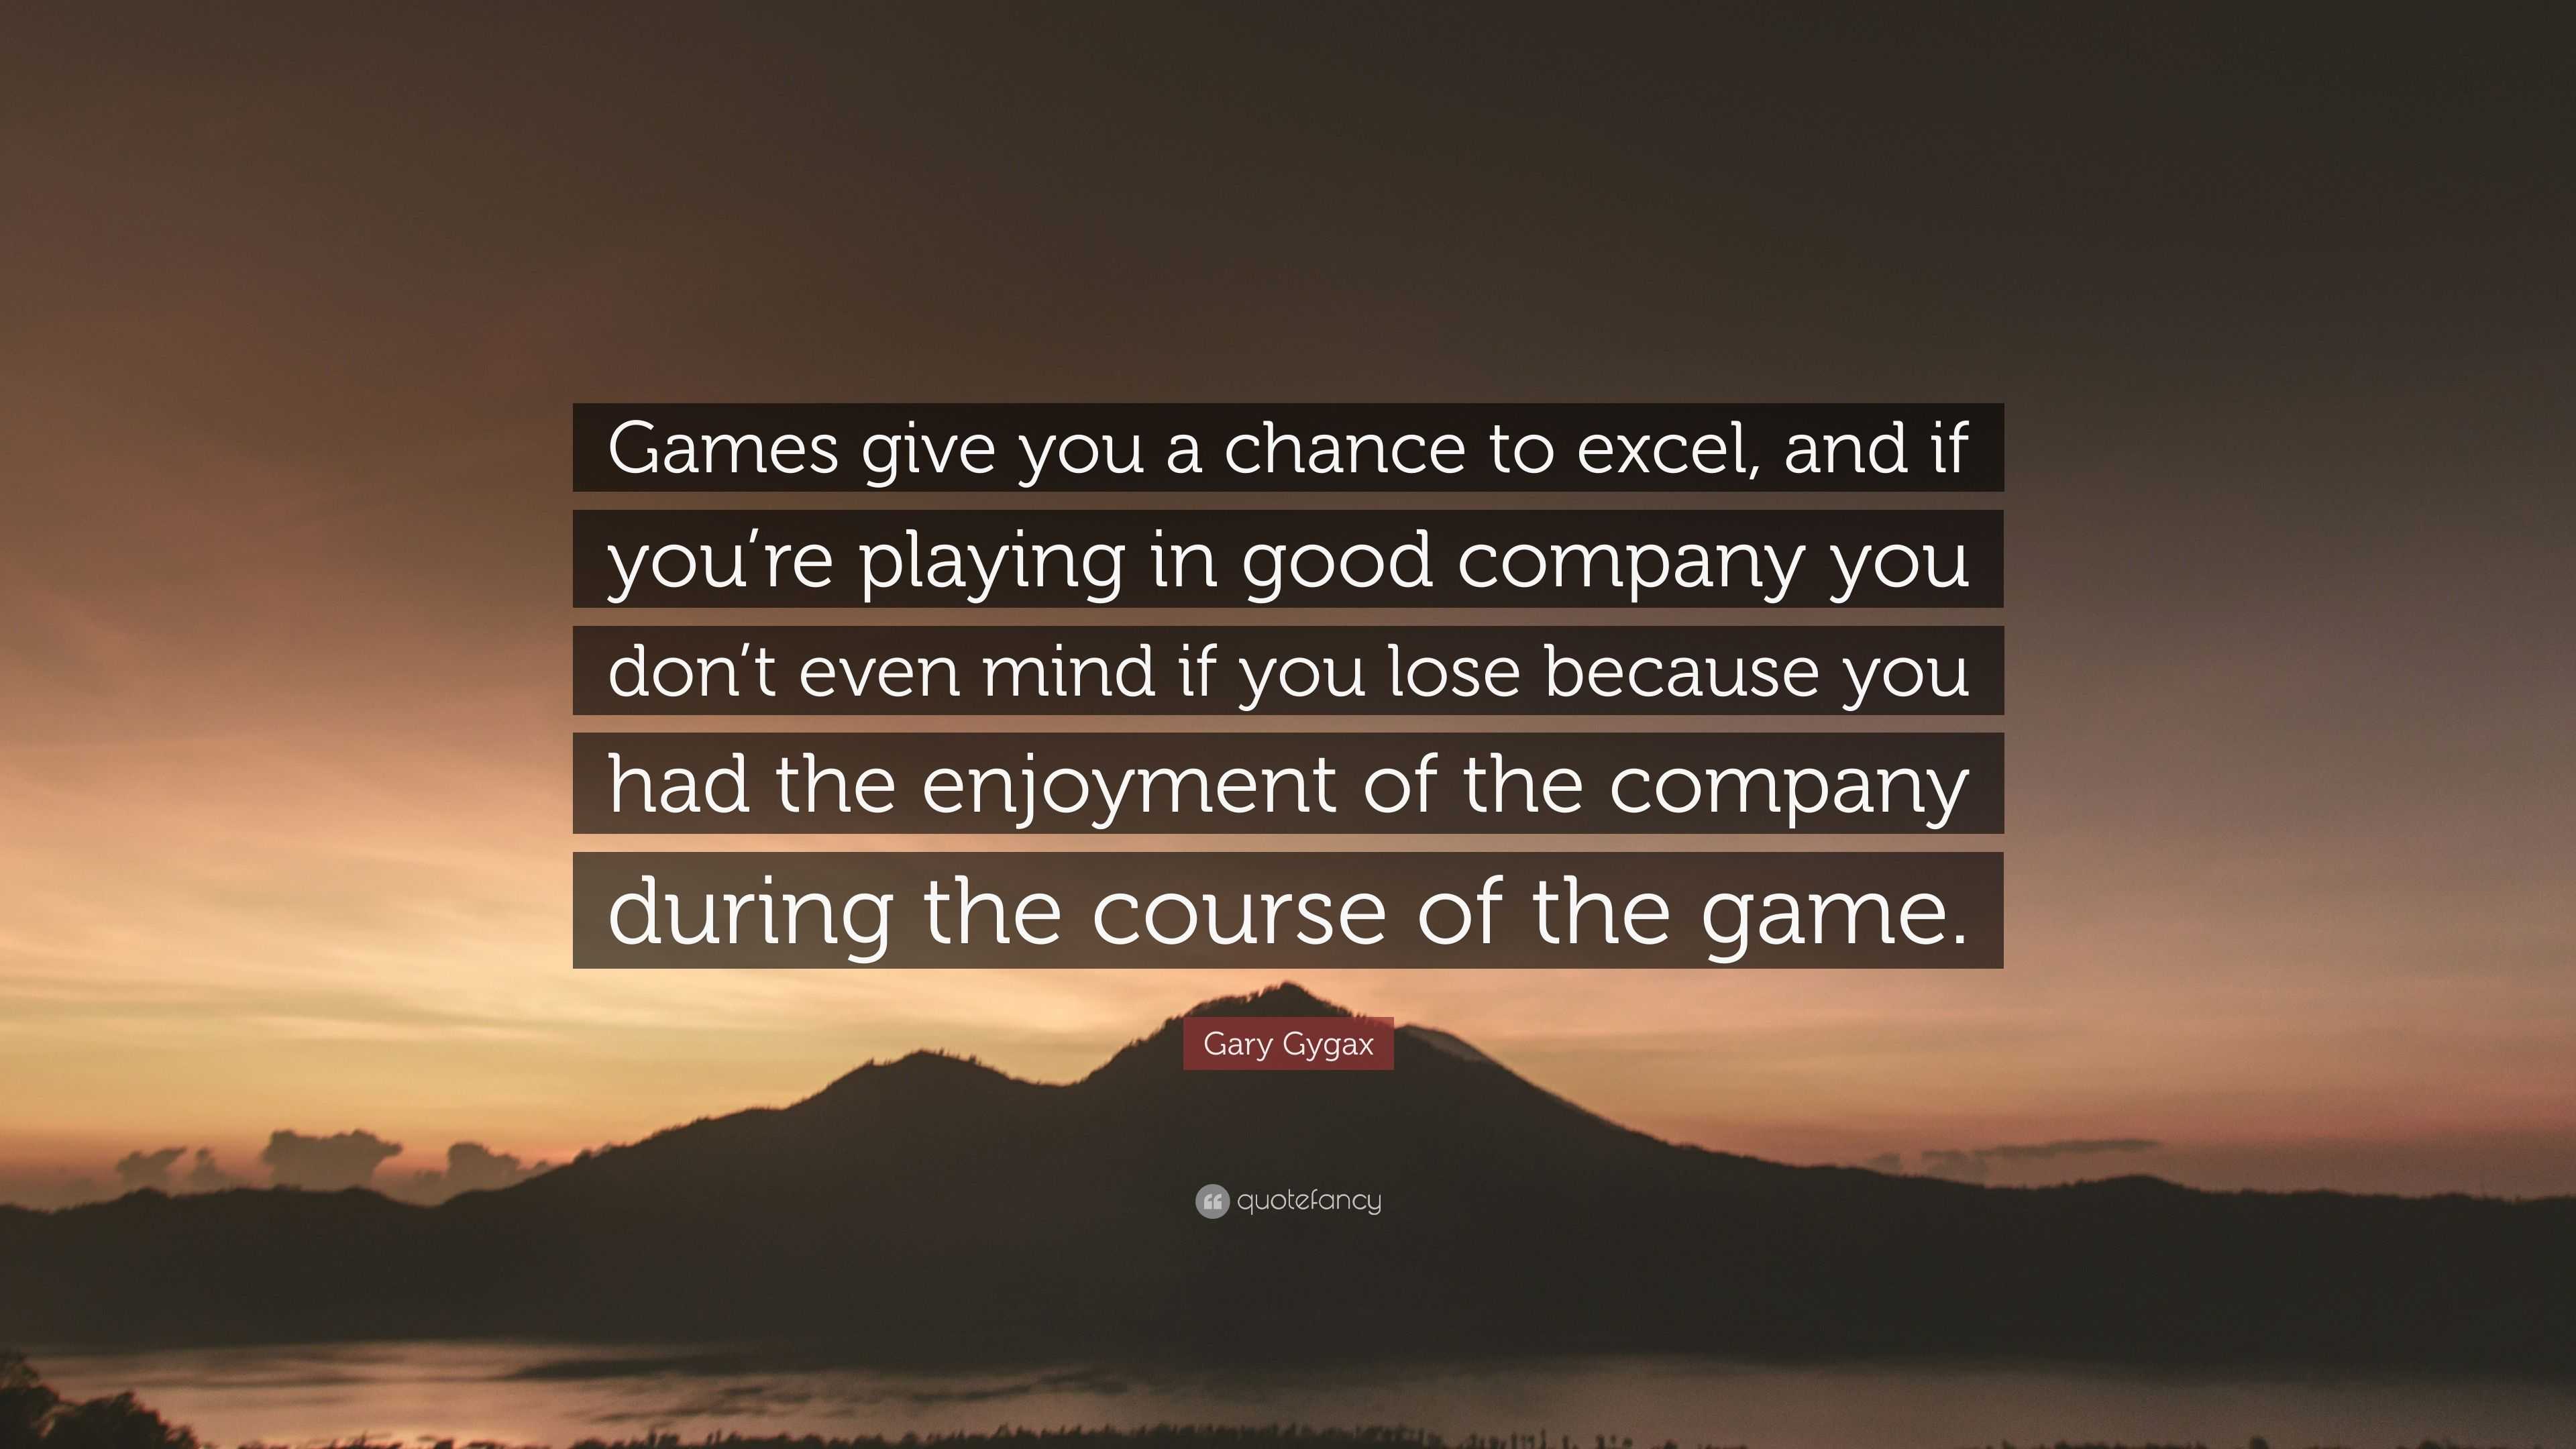 Games give you a chance to excel, and if